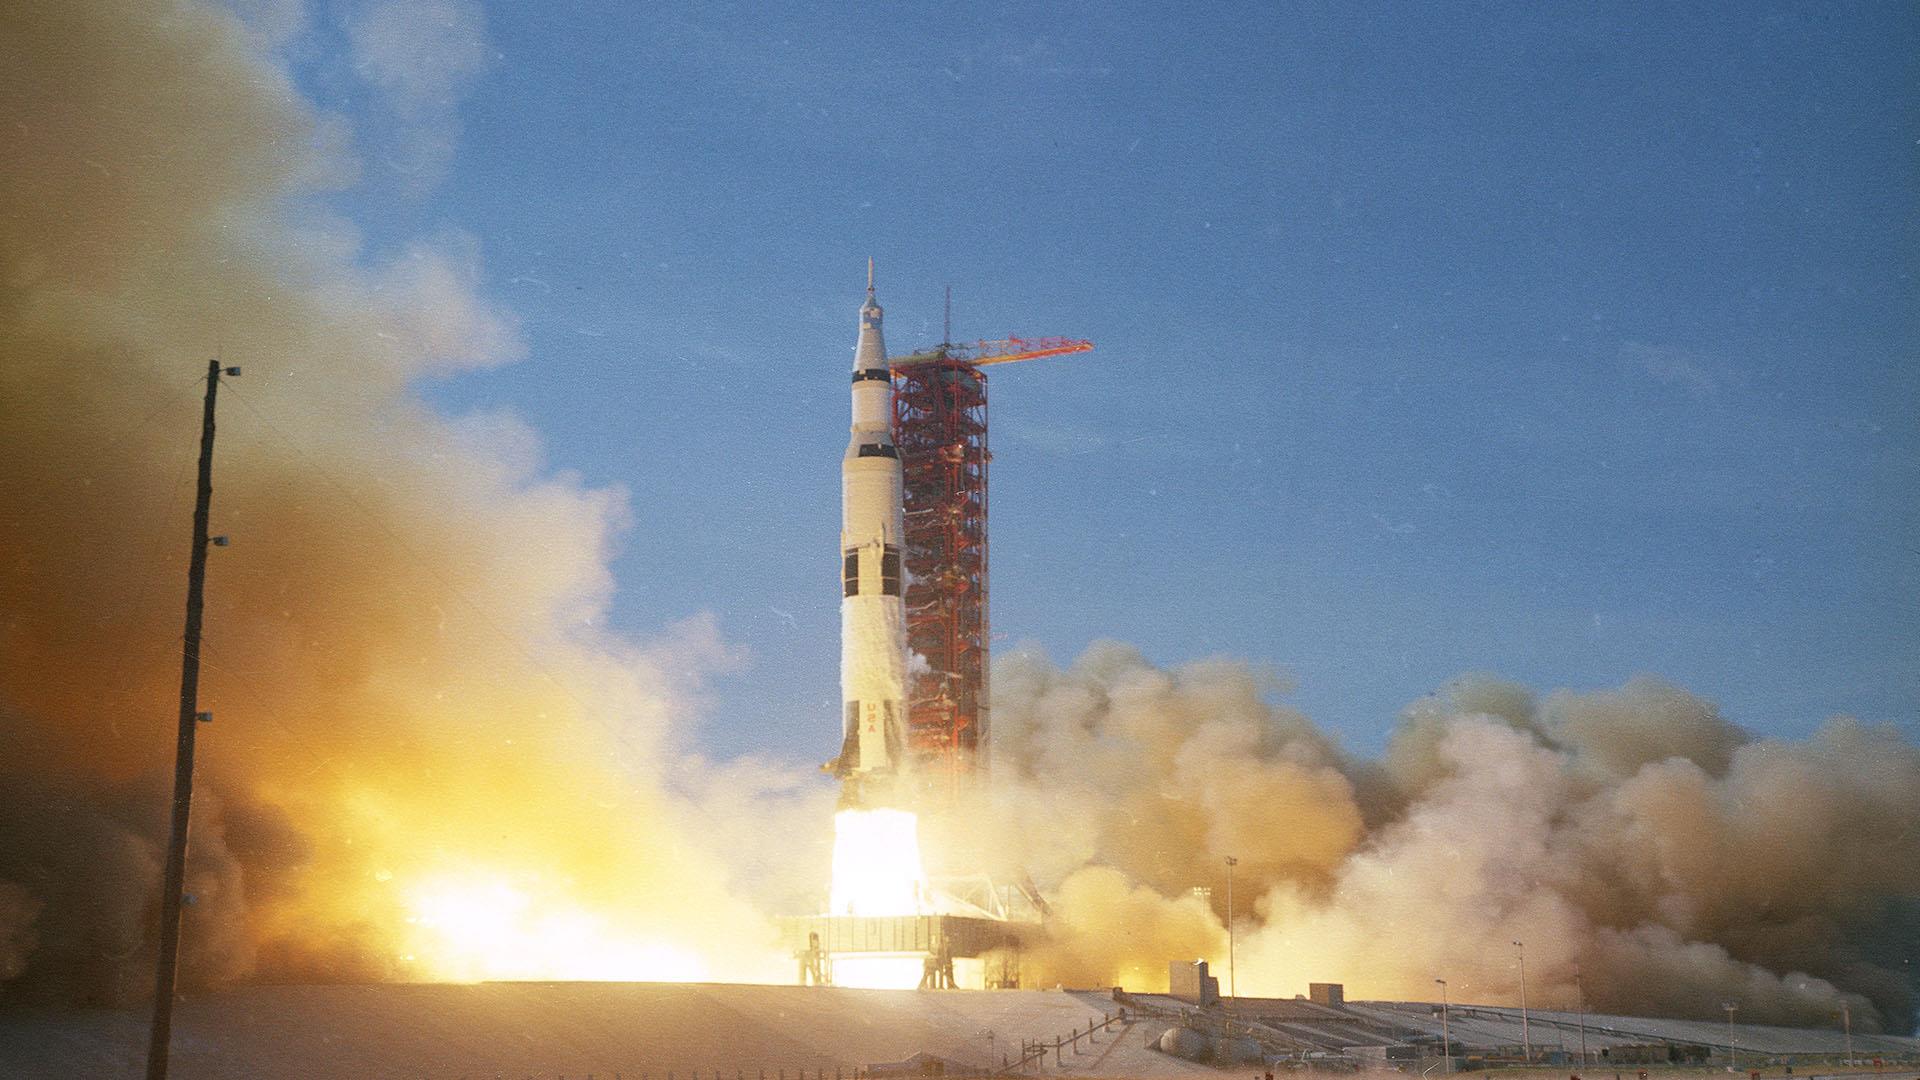 50 years later, Apollo 11 is still a miracle
	
	